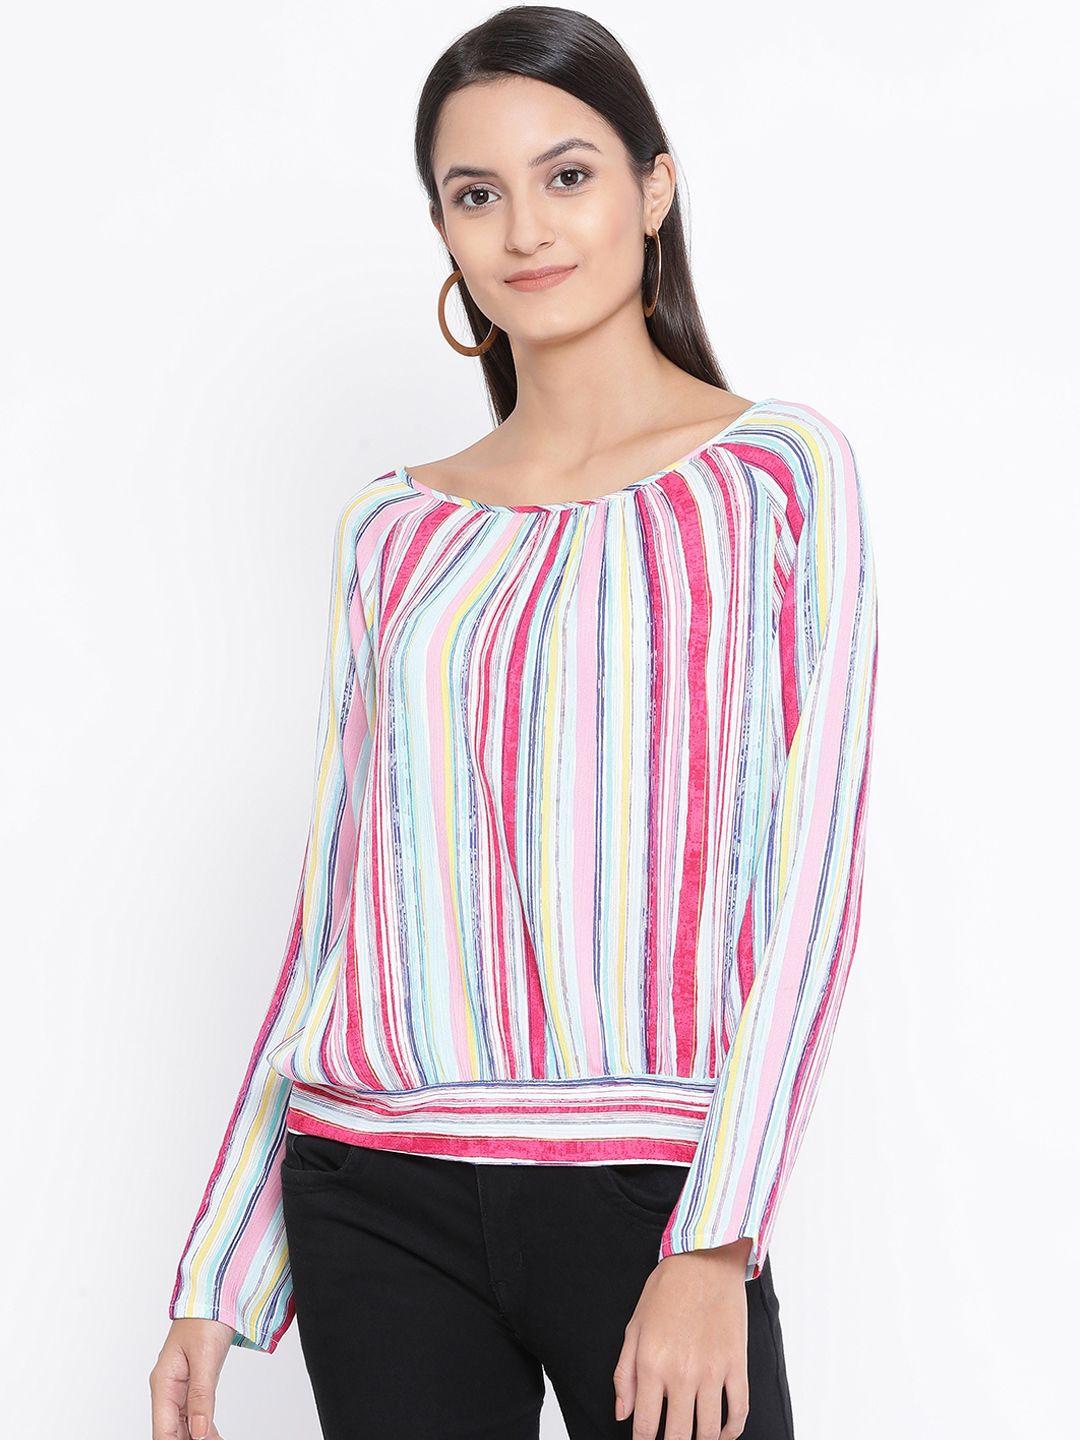 oxolloxo women pink striped a-line top